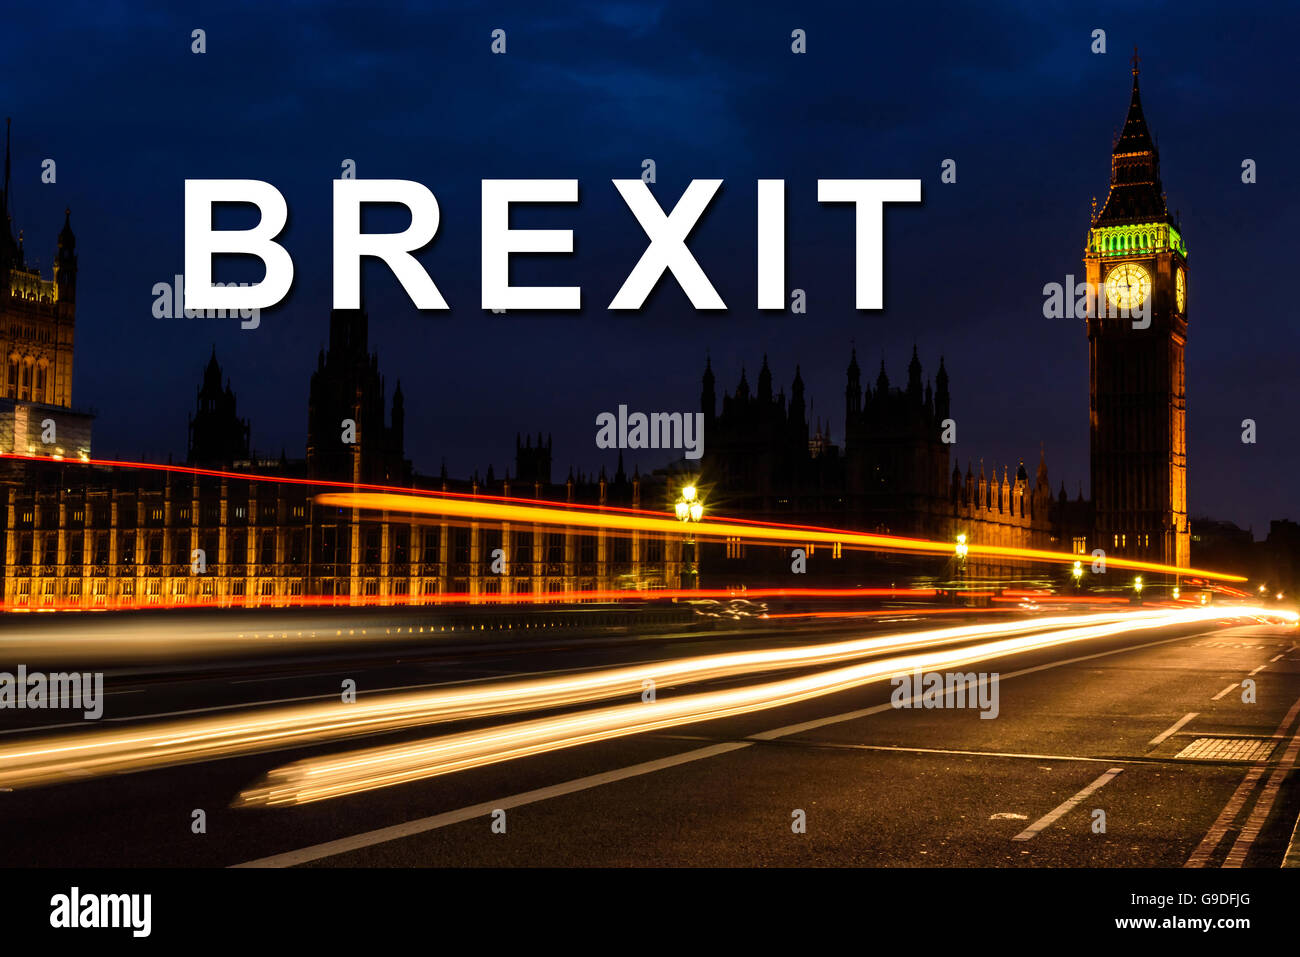 brexit or british exit with Light trail in the night at Big Ben Clock Tower and House of Parliament, London, England, UK, select Stock Photo